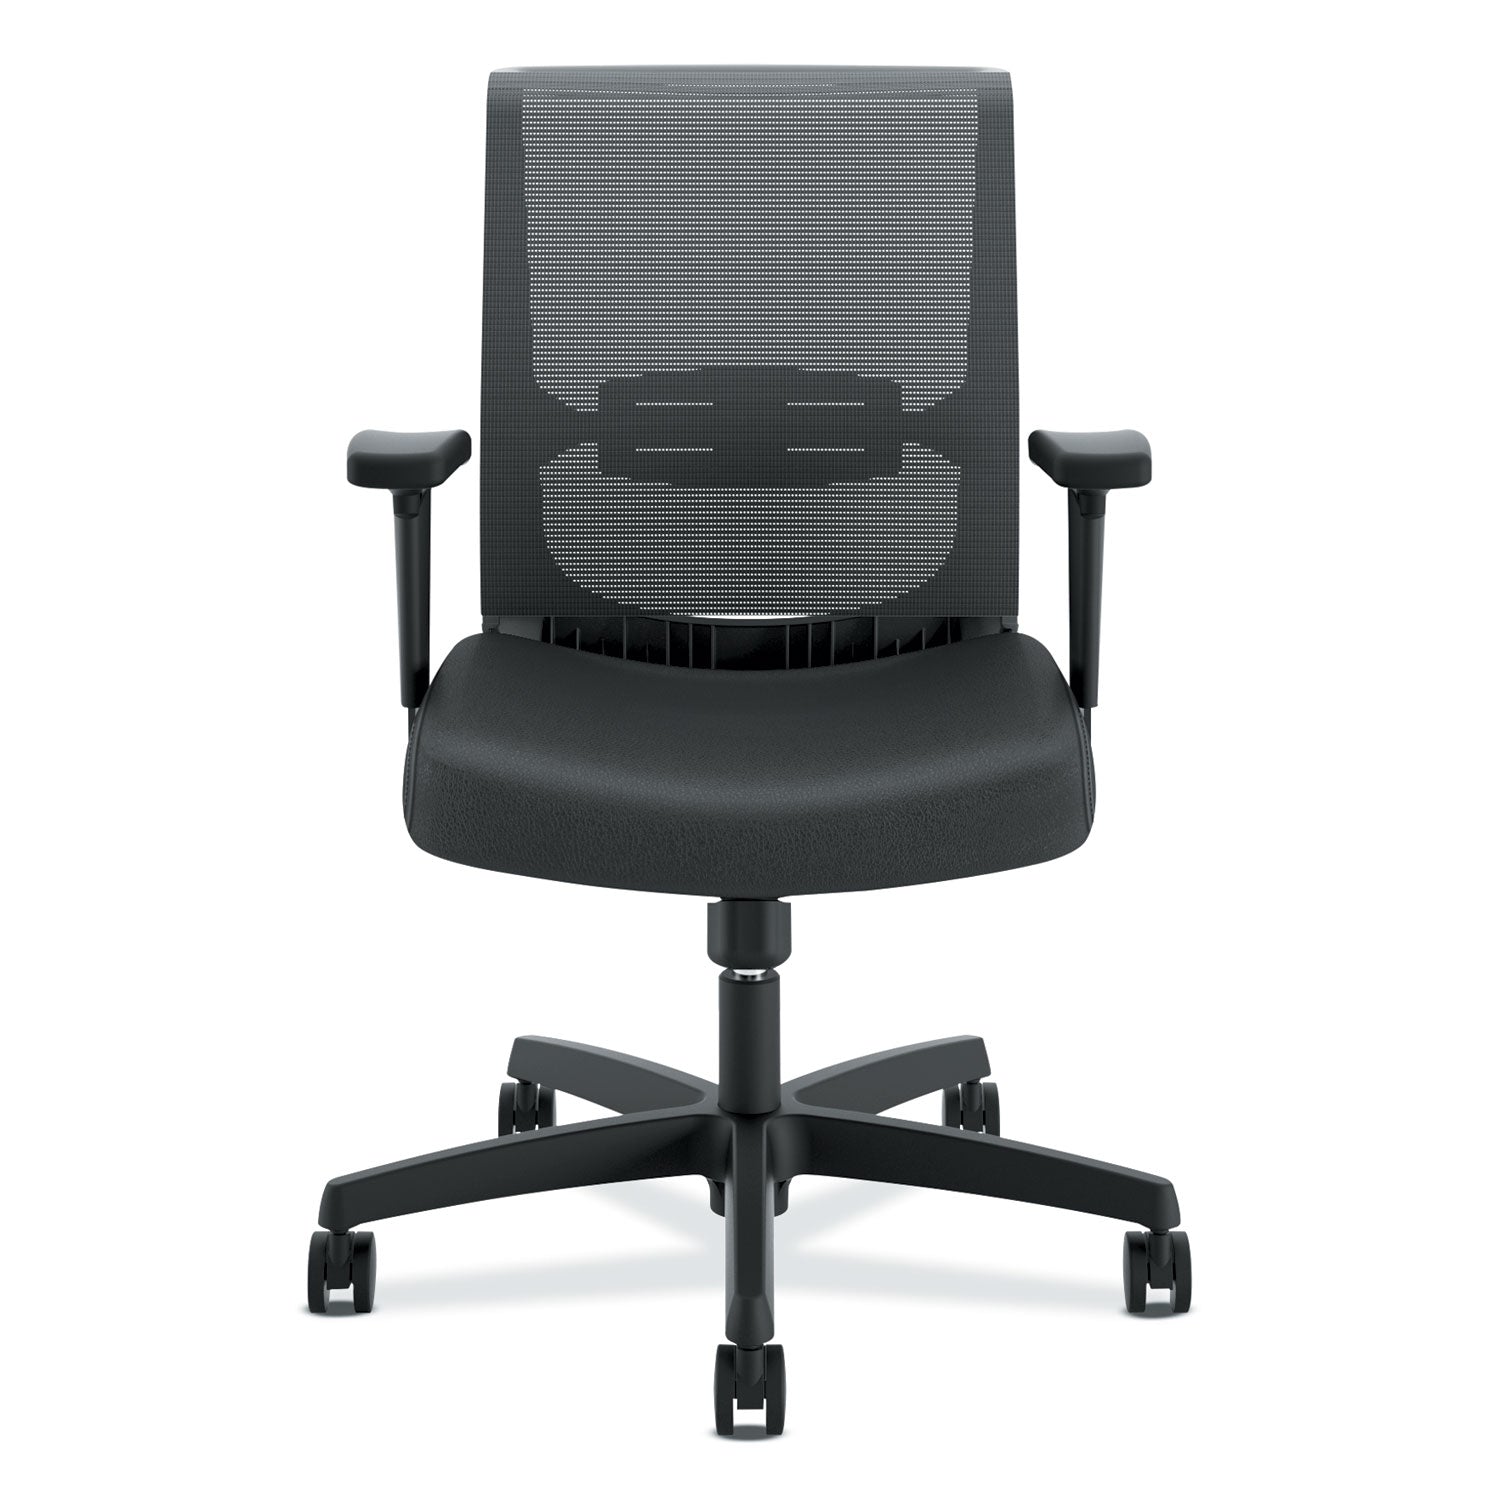 convergence-mid-back-task-chair-swivel-tilt-supports-up-to-275-lb-1575-to-2013-seat-height-black_honcms1aur10 - 1